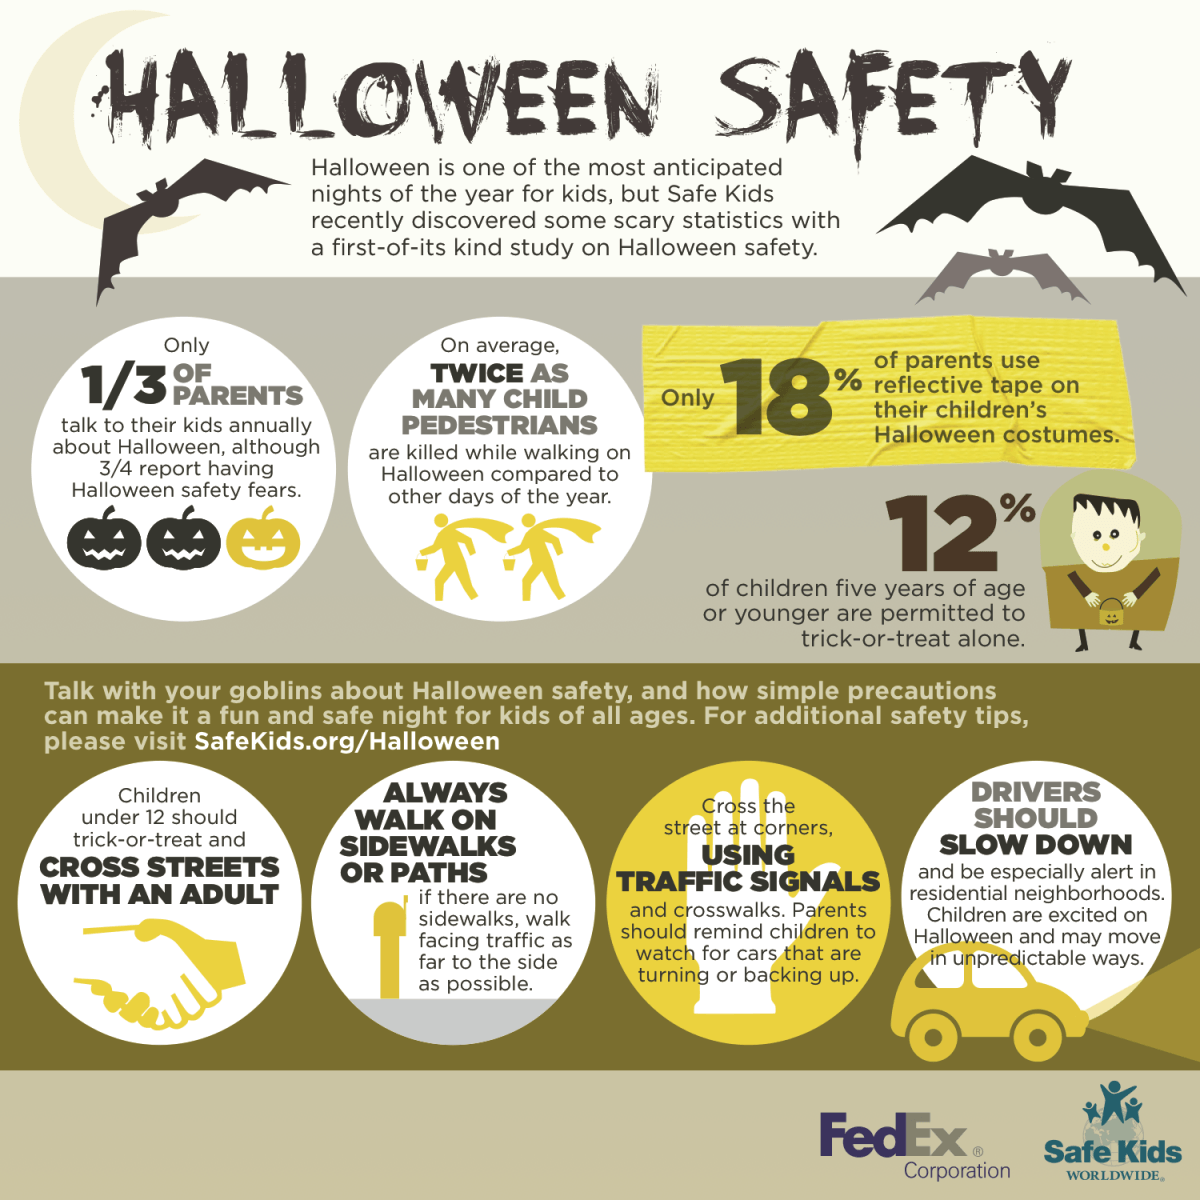 FedEx Safety Logo - Frightening Facts Revealed in Halloween Safety Study